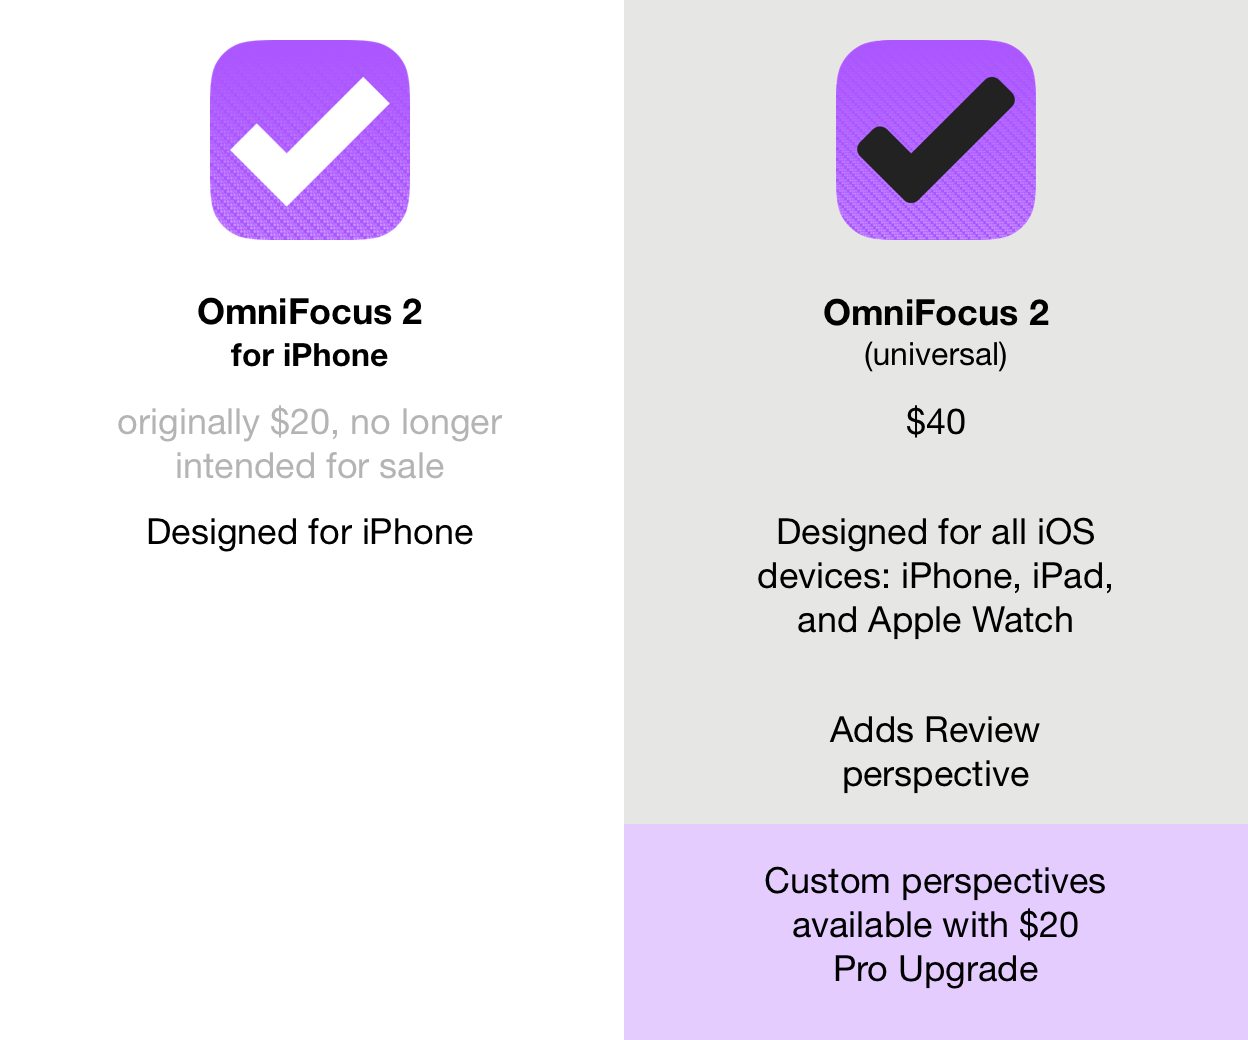 Different editions of OmniFocus for iPhone and iOS